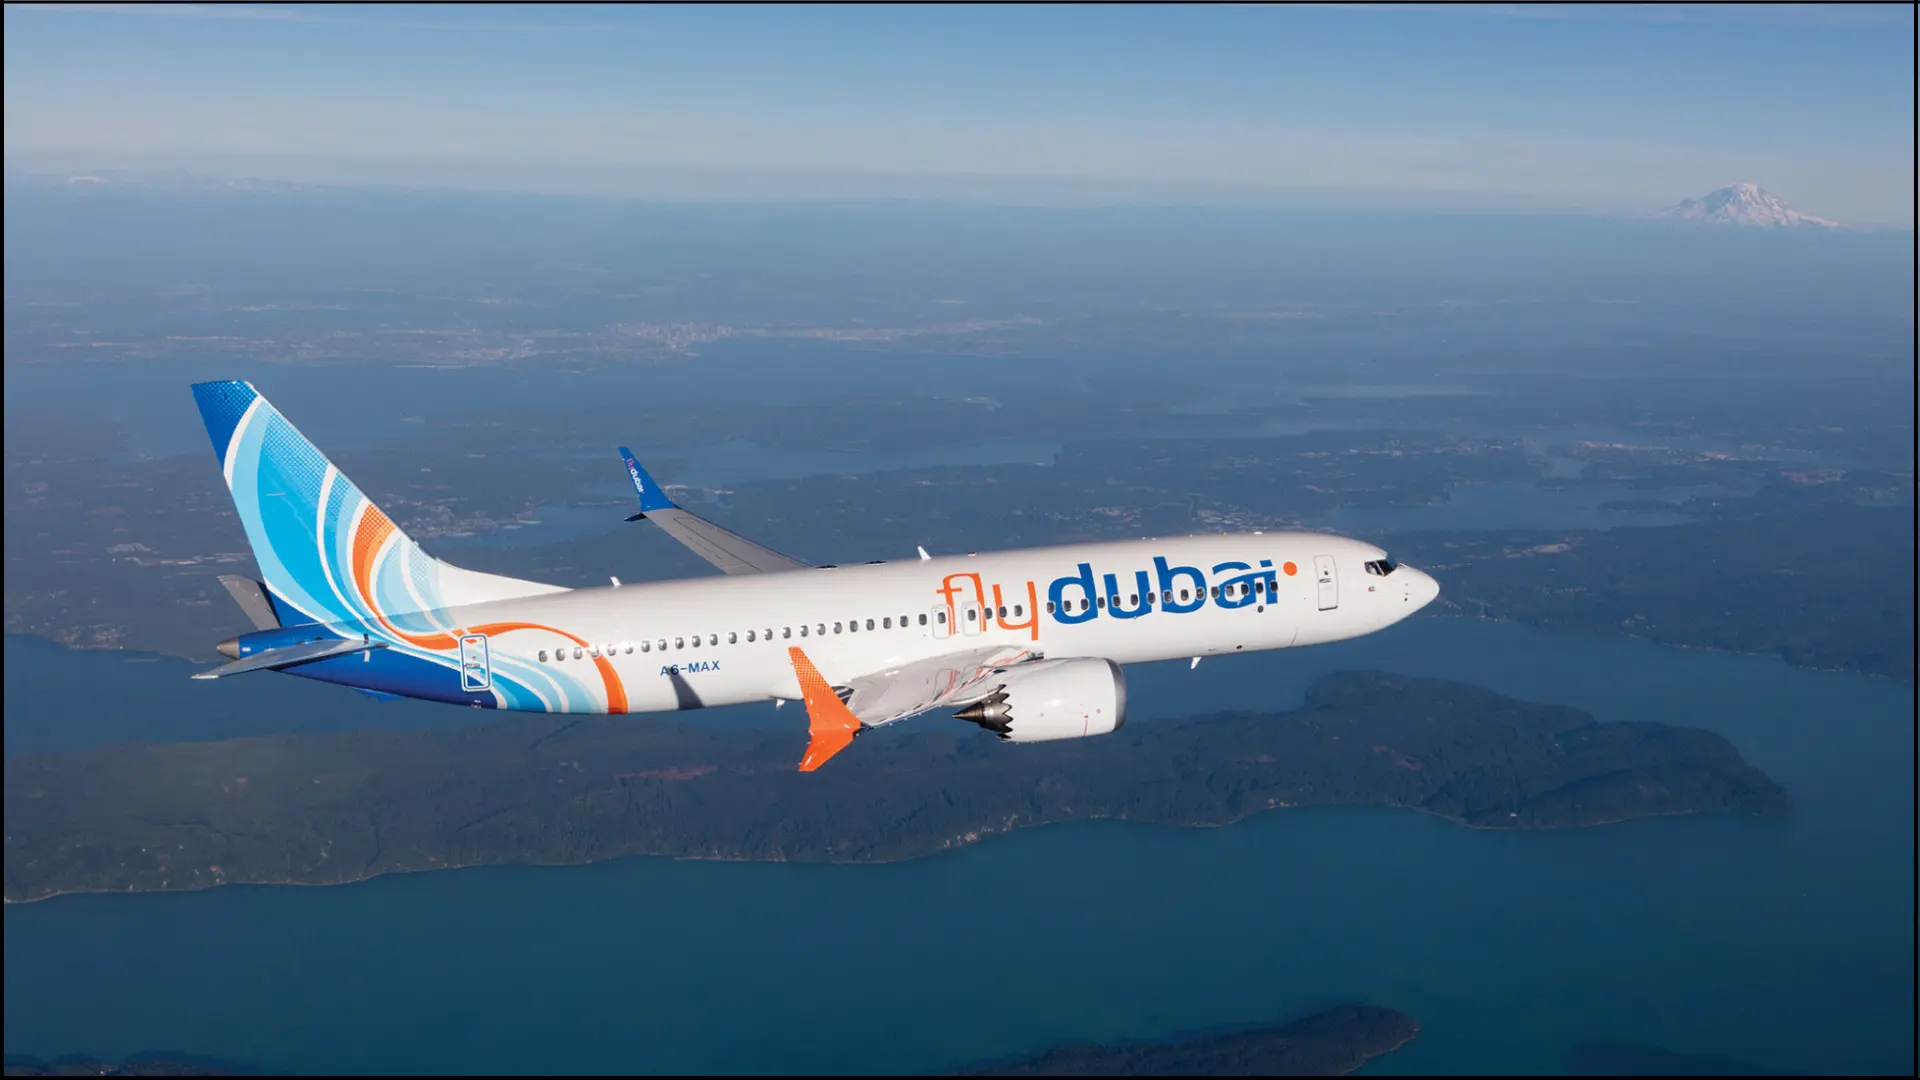 flydubai Expands Southeast Asia Network: Introducing Flights to Penang and Langkawi